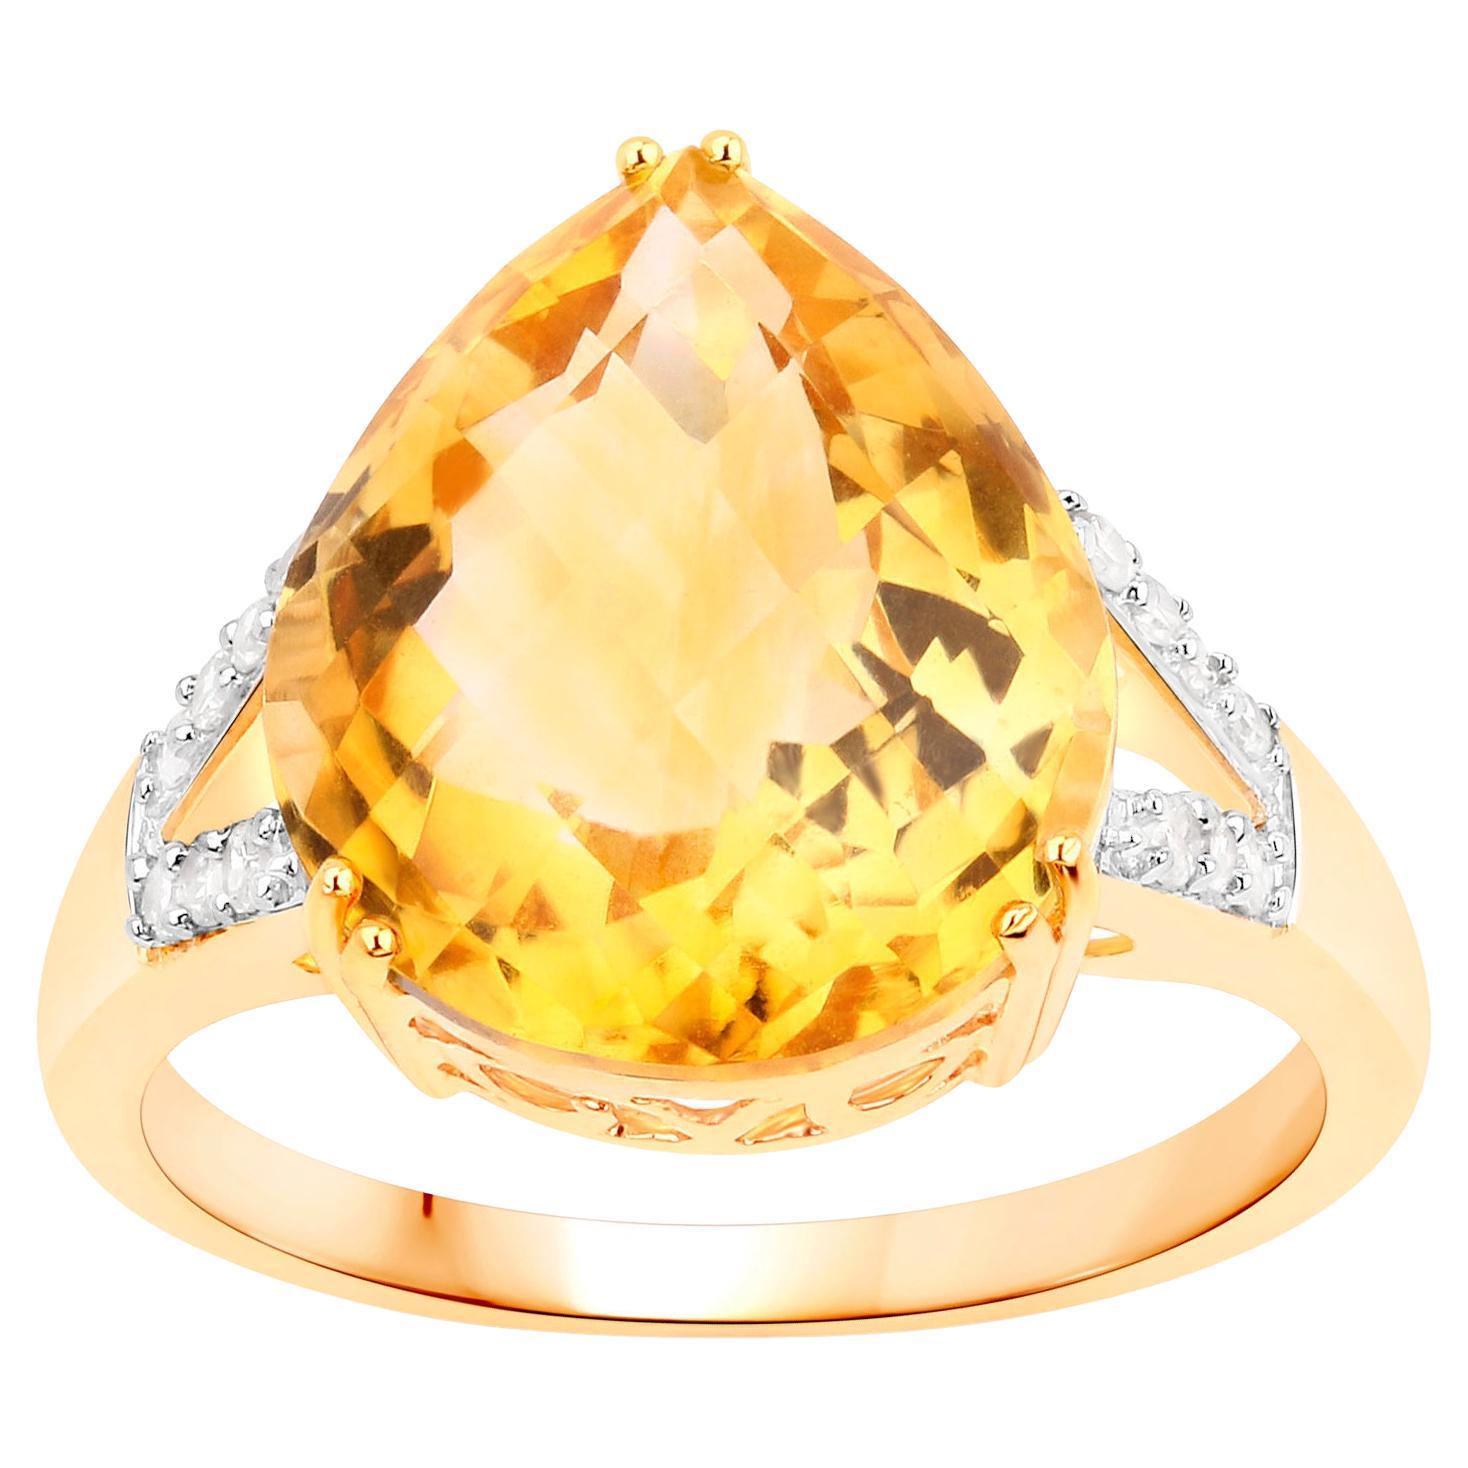 Citrine Ring With Diamonds 7.37 Carats 14K Yellow Gold For Sale